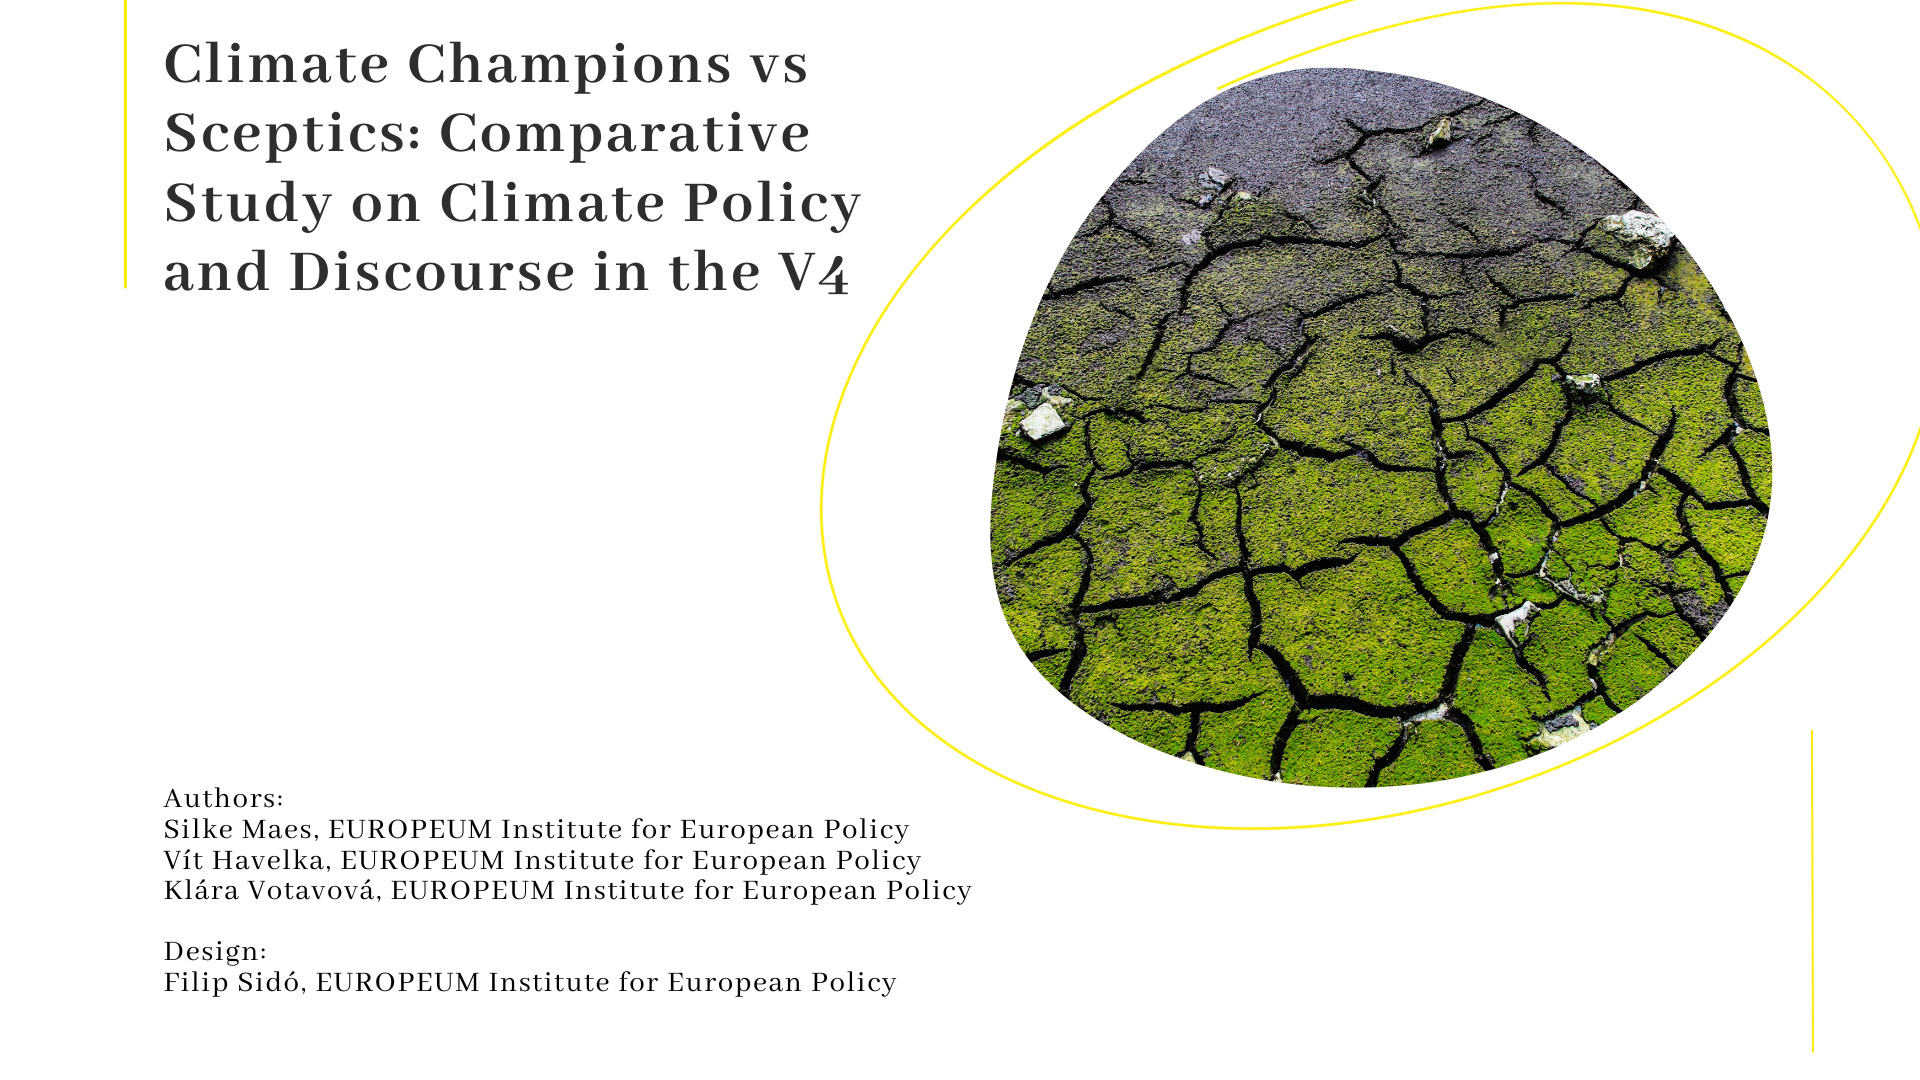 Comparative Study on Climate Policy and Discourse in the V4